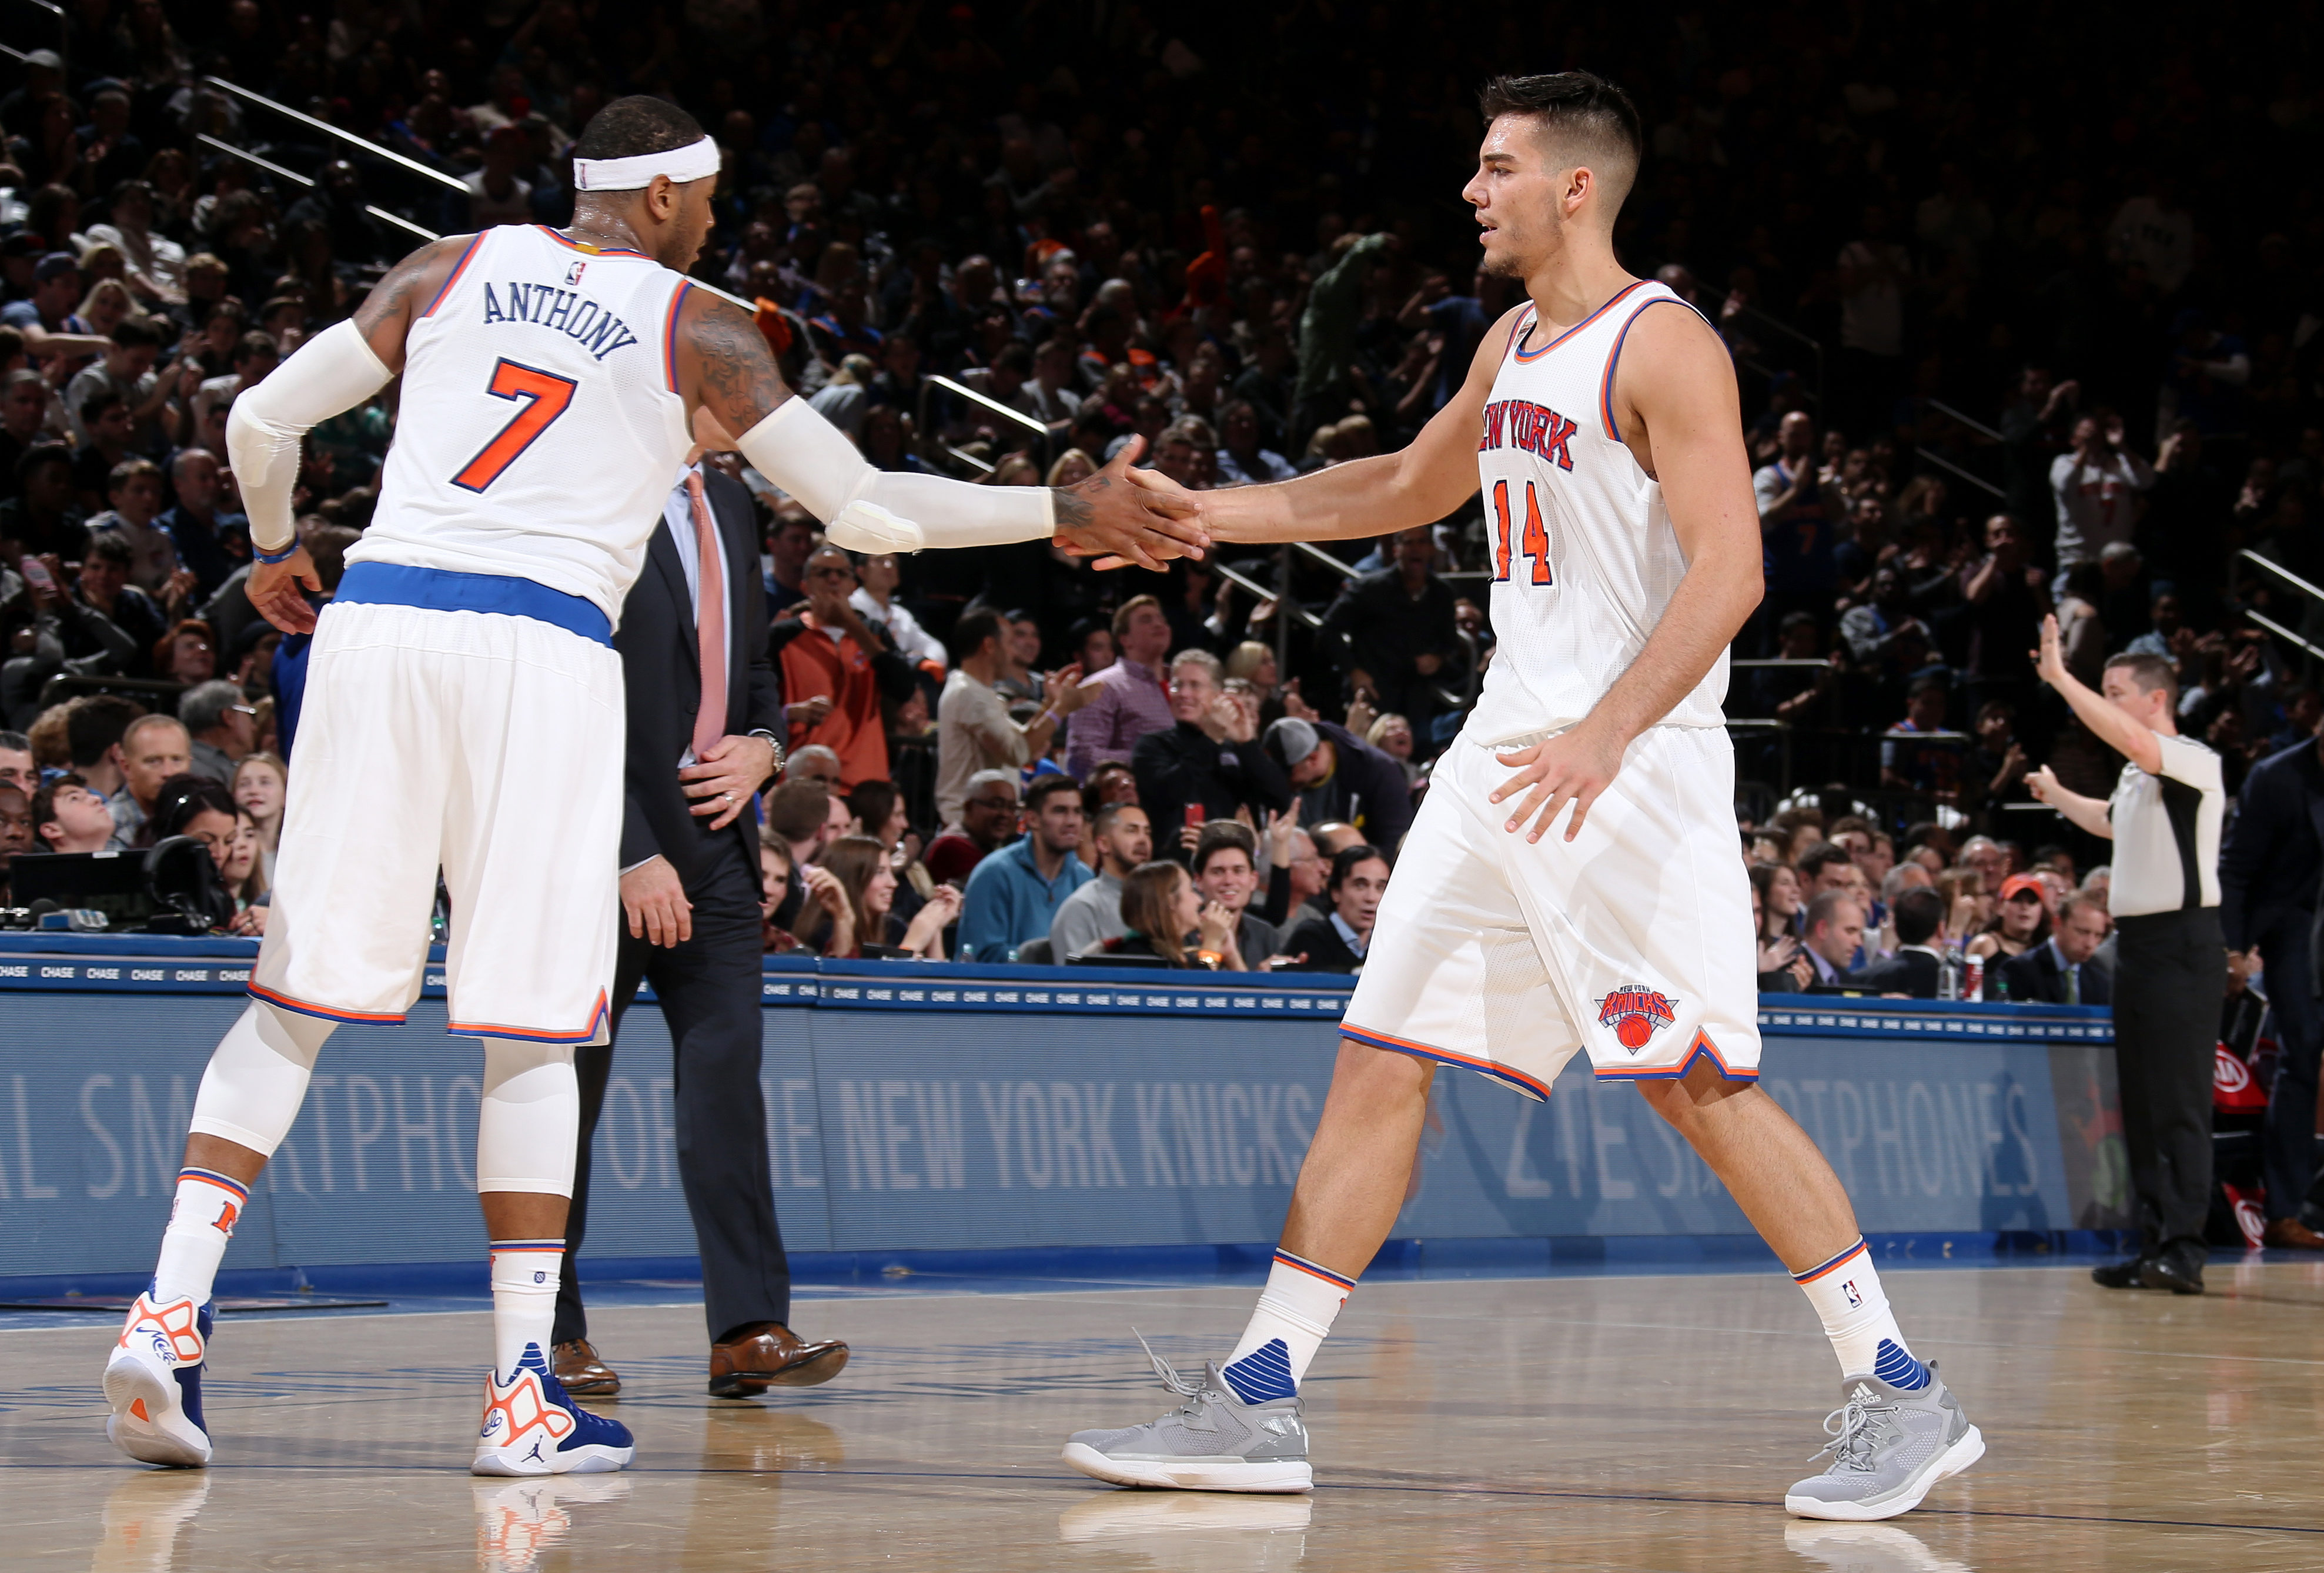 NEW YORK CITY - NOVEMBER 25: Carmelo Anthony #7 and Willy Hernangomez #14 of the New York Knicks high five during the game against the Charlotte Hornets at Madison Square Garden in New York, New York. NOTE TO USER: User expressly acknowledges and agrees that, by downloading and/or using this Photograph, user is consenting to the terms and conditions of the Getty Images License Agreement. Mandatory Copyright Notice: Copyright 2016 NBAE (Photo by Nathaniel S. Butler/NBAE via Getty Images)